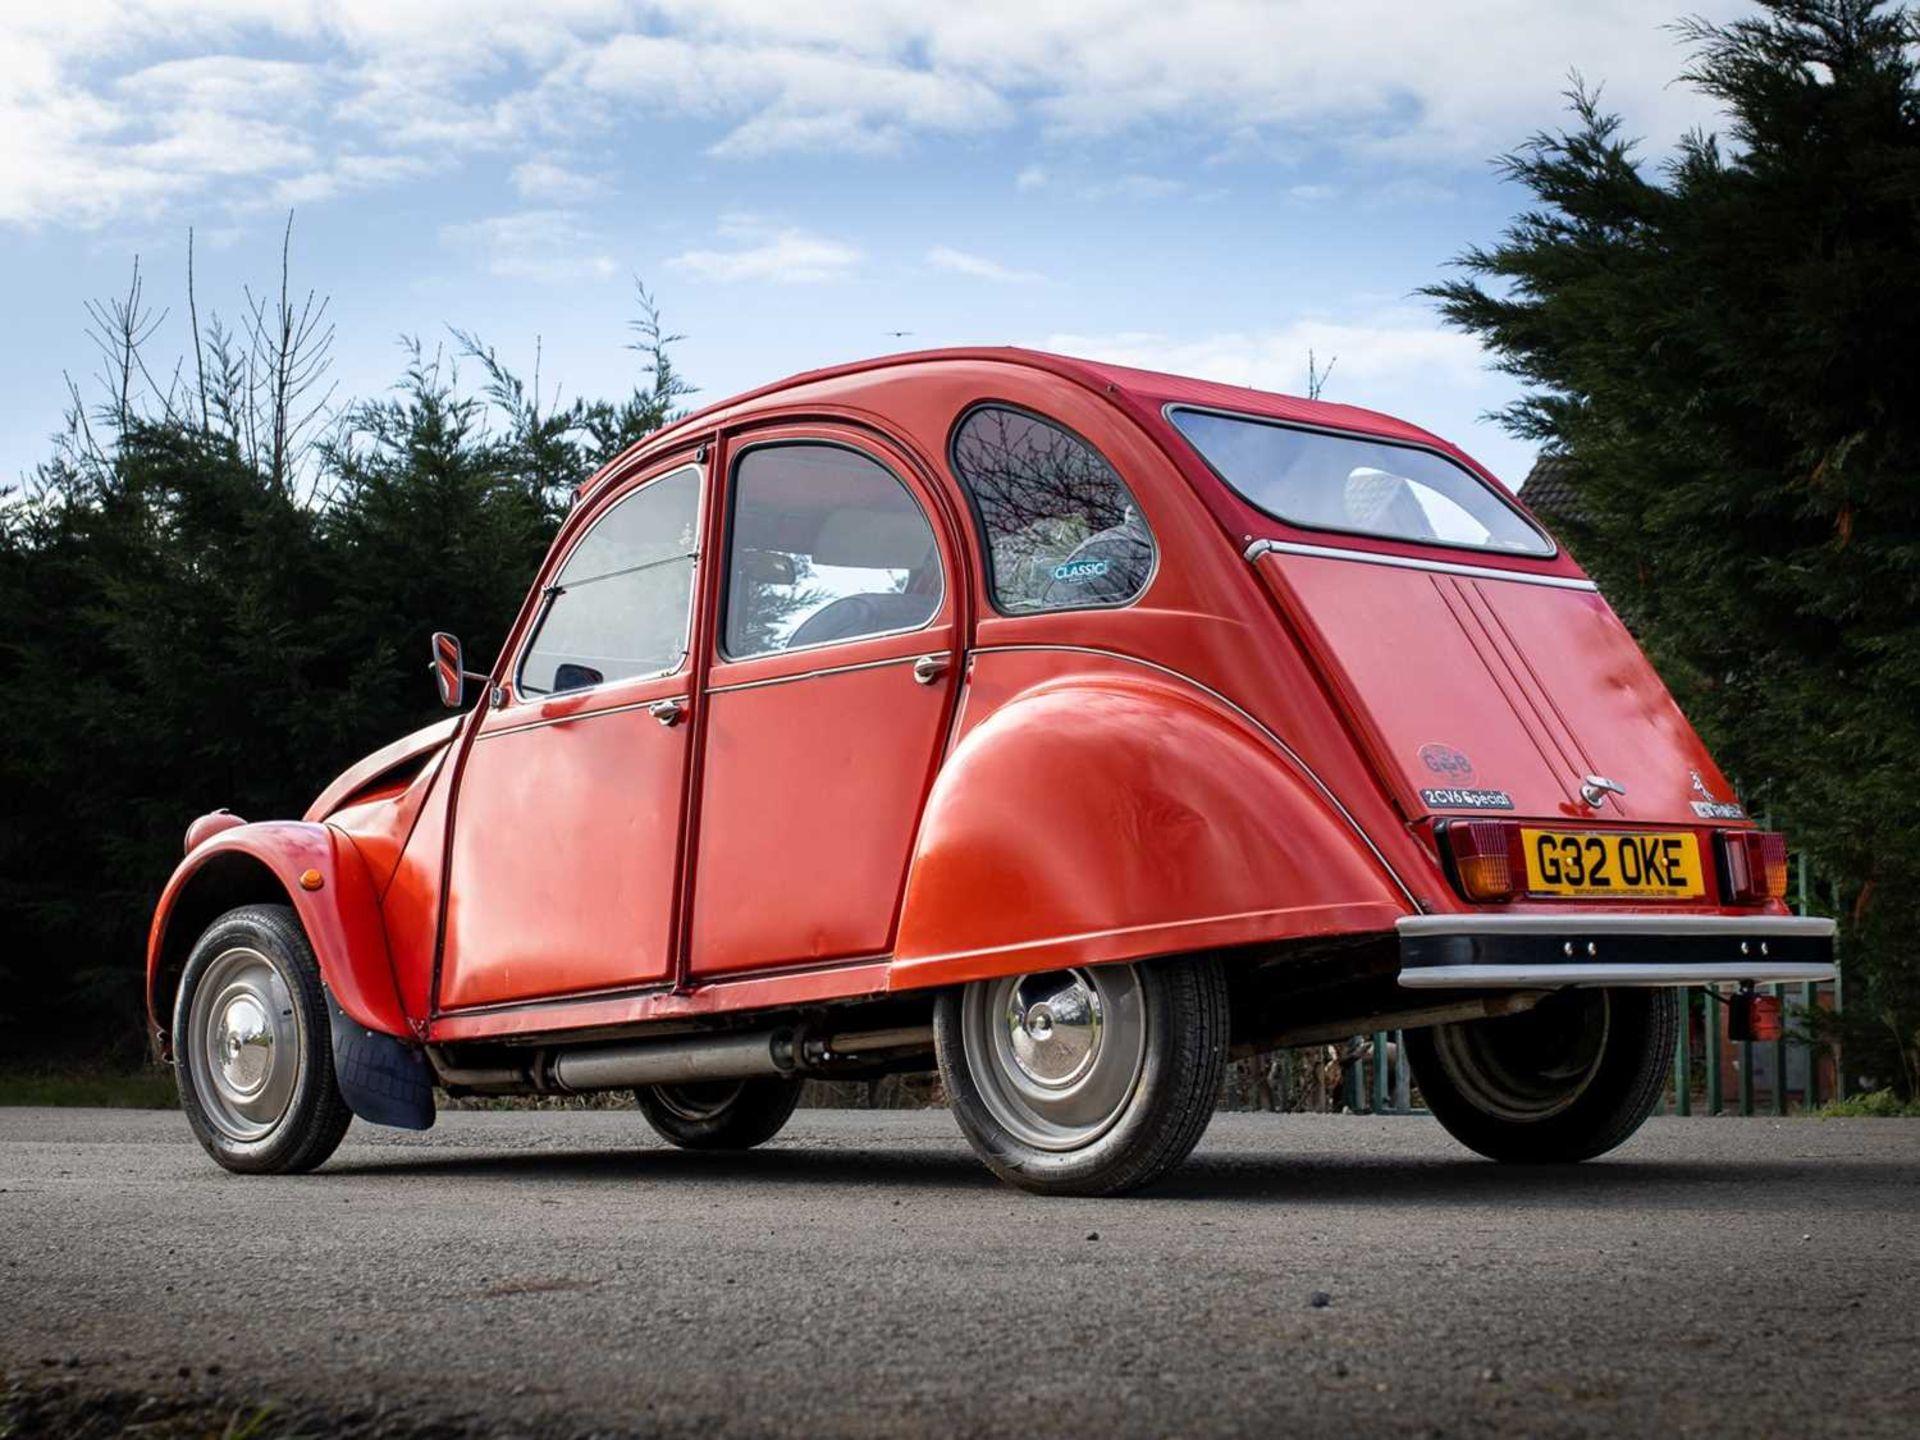 1989 Citroën 2CV6 Spécial Believed to have covered a credible 15,000 miles - Image 16 of 113